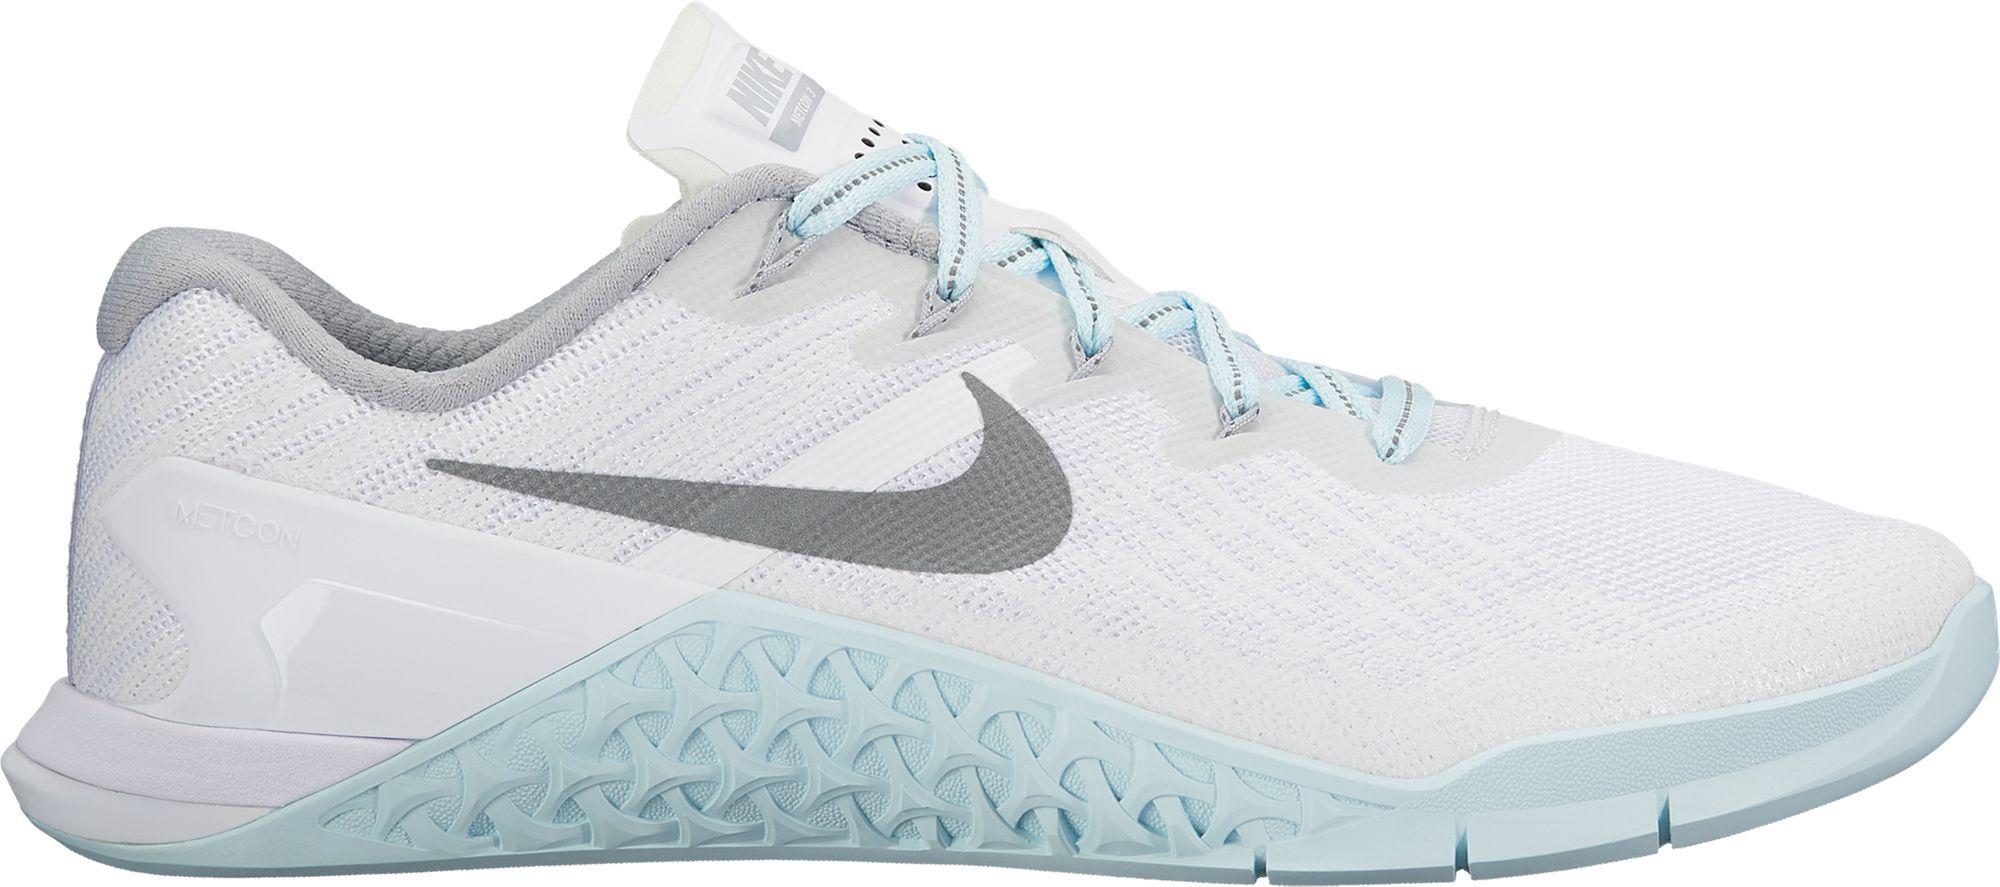 Nike Rubber Metcon 3 Training Shoes in White/Silver/Blue (Blue) - Lyst